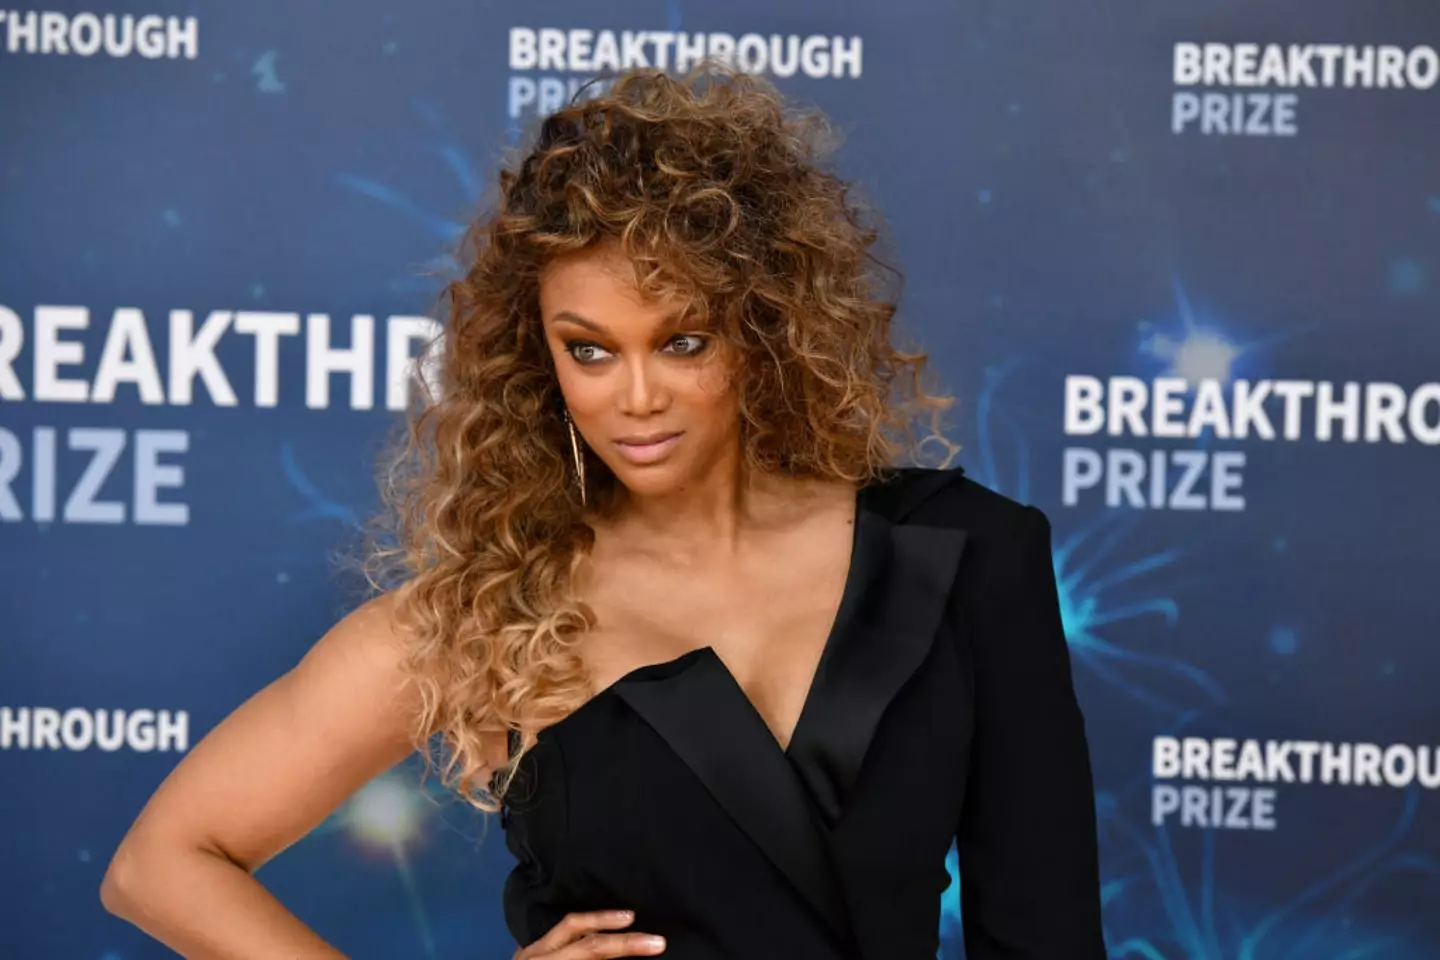 Model Tyra Banks turned 50 last year. (Ian Tuttle/Getty Images for Breakthrough Prize)